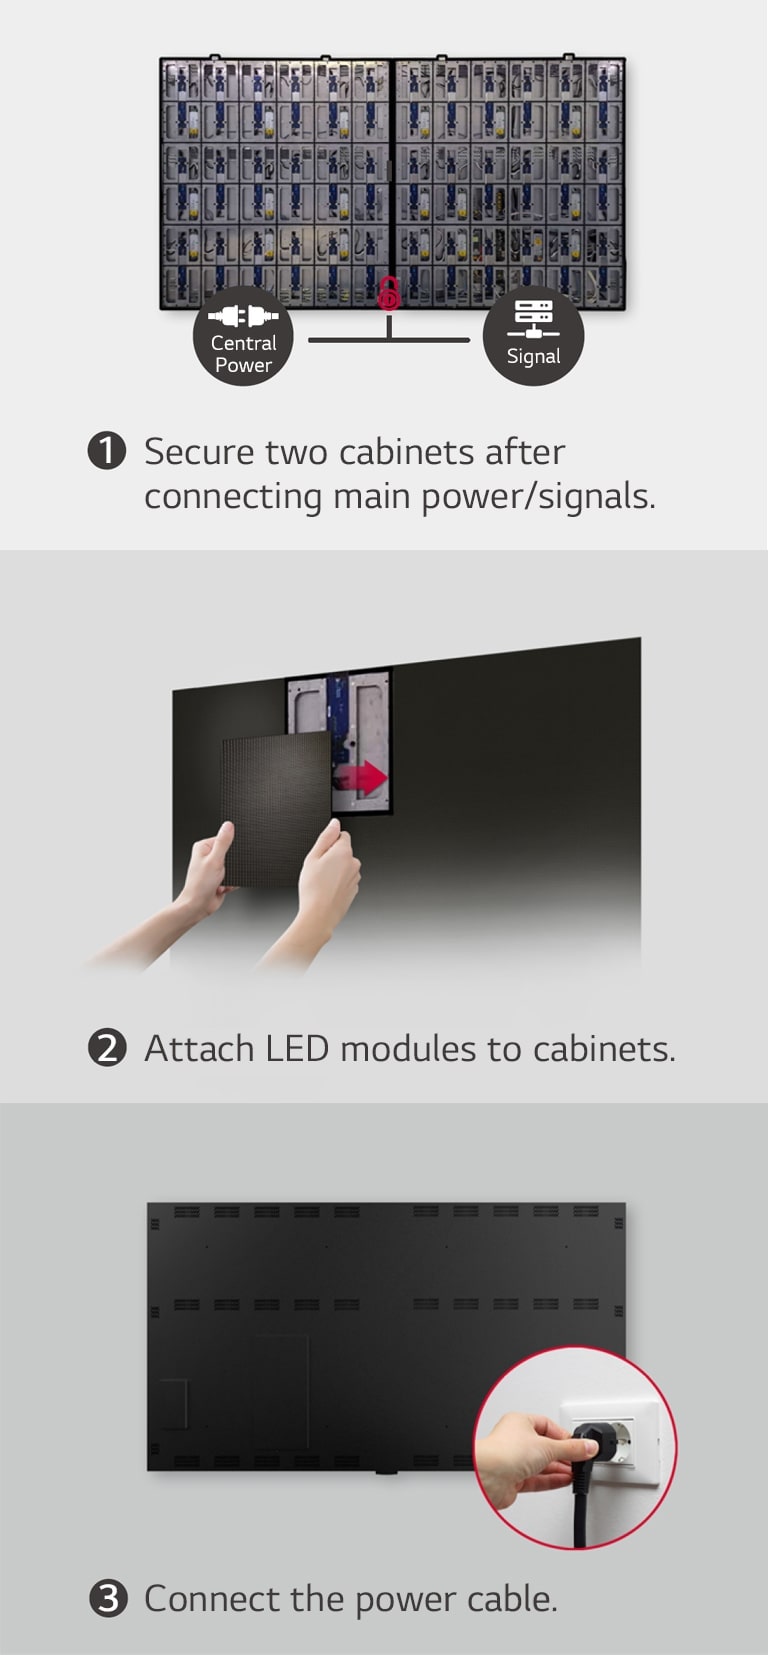 This consists of total 3 steps' images for securing two cabinets, attaching LED modules, and connecting the power cable.